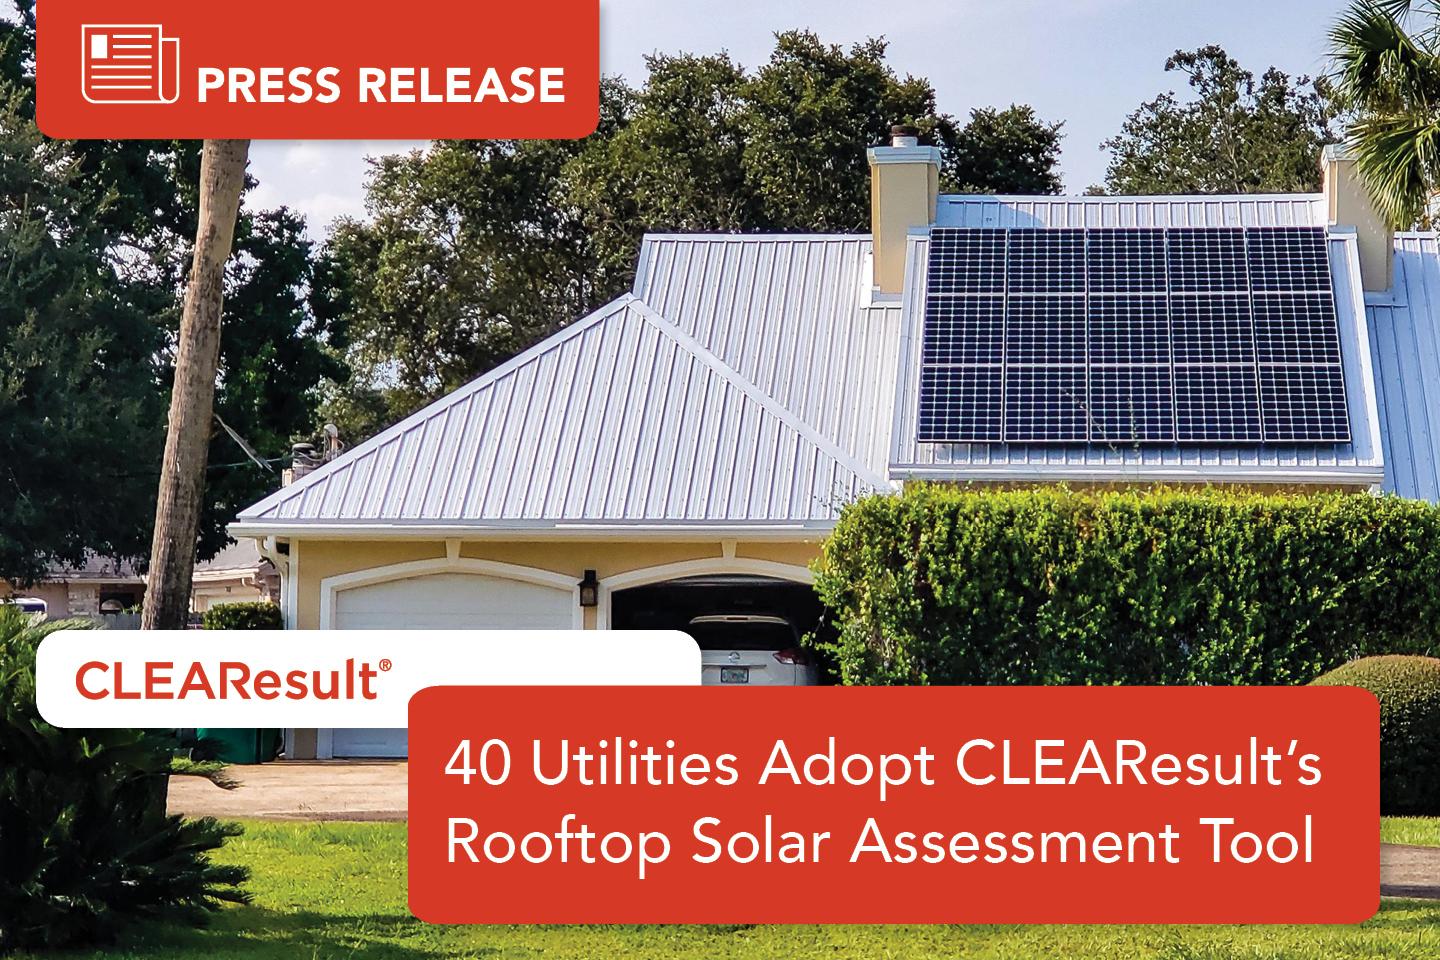 40 Electric Providers Adopt CLEAResult’s Online Rooftop Solar Assessment Tool